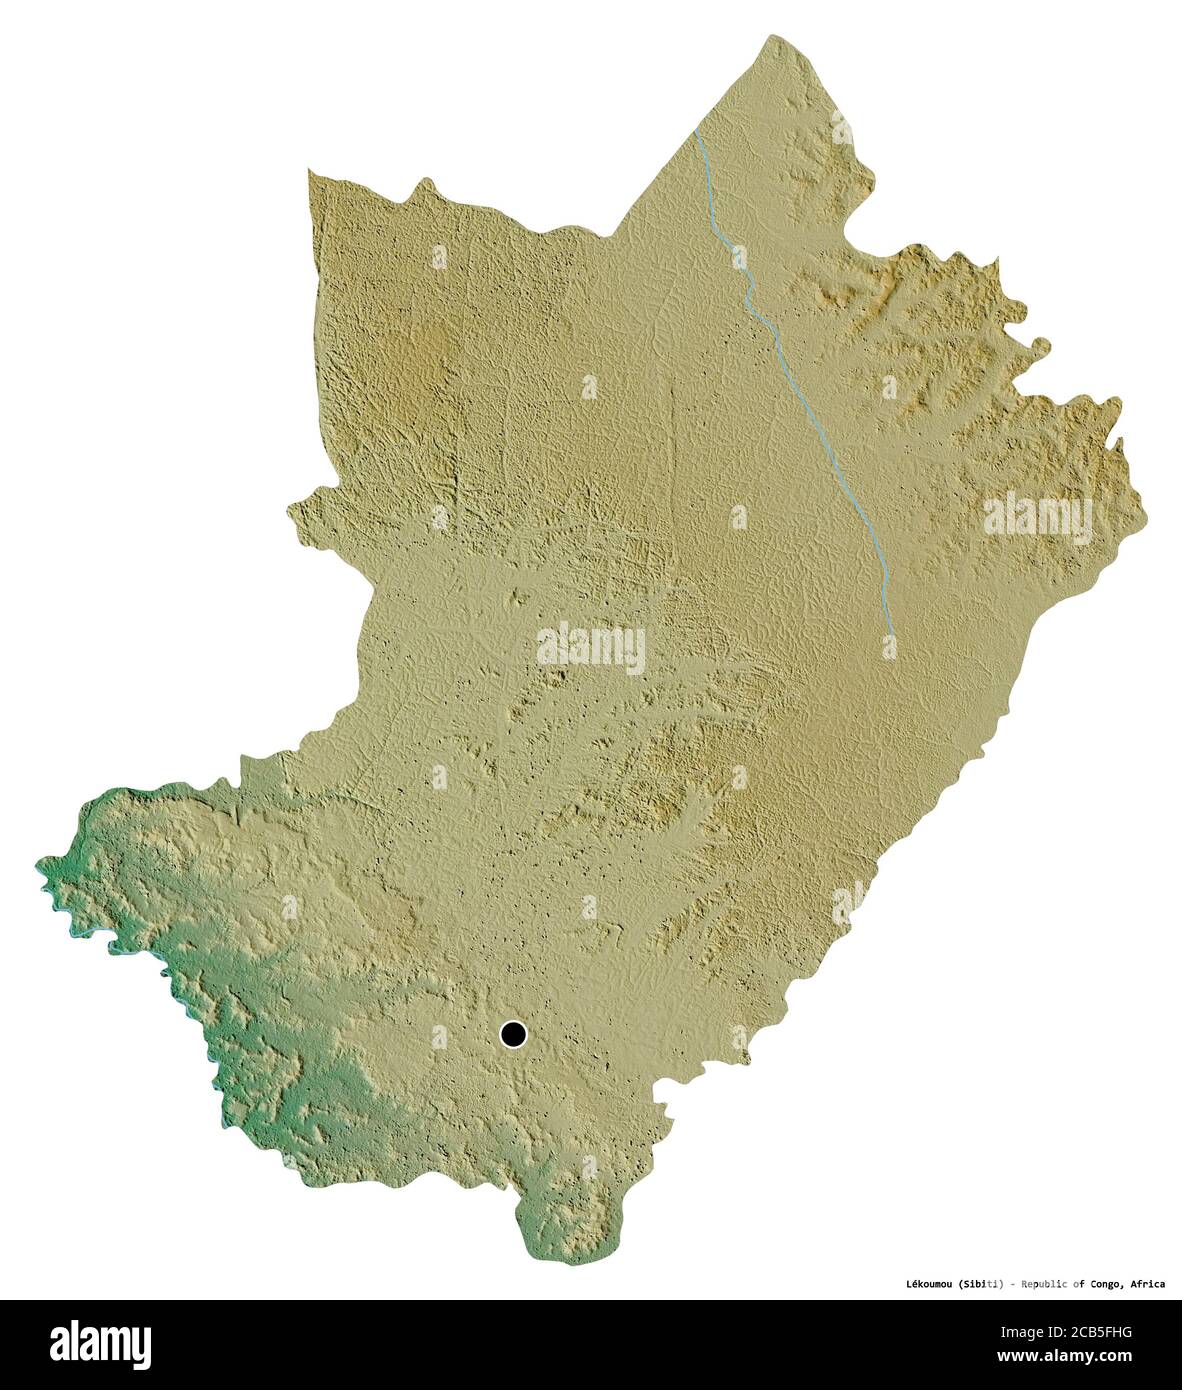 Shape of Lékoumou, region of Republic of Congo, with its capital isolated on white background. Topographic relief map. 3D rendering Stock Photo